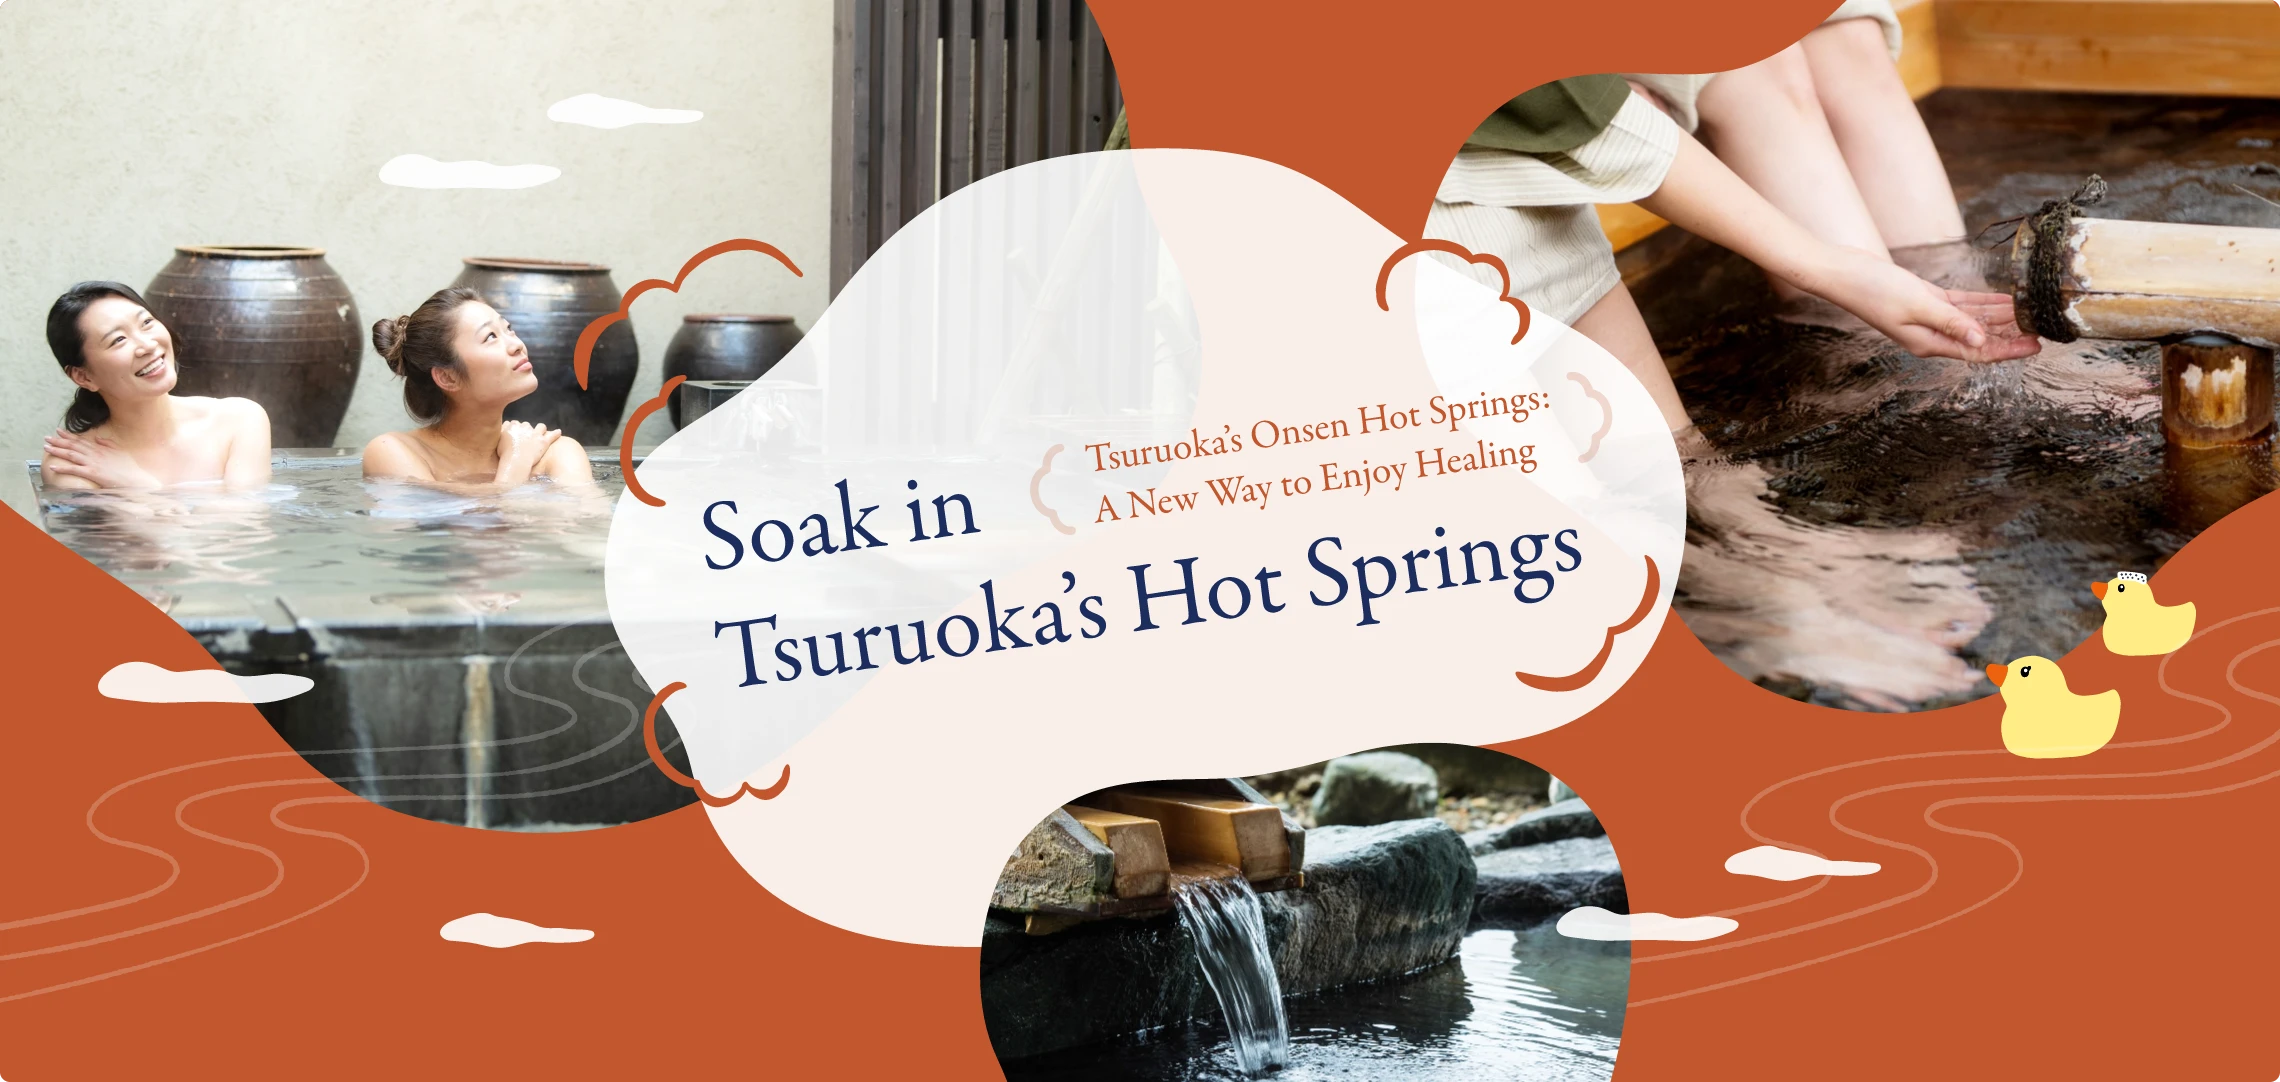 Tsuruoka's Onsen Hot Springs: A New Way to Enjoy Healing. Soak in Tsuruoka's Hot Springs | Soak in Tsuruoka's Hot SpringsYamagata Prefecture has the highest number of nationally designated hot-spring health resorts in Japan, with eight such areas, four of which are located in the city of Tsuruoka – the most of any municipality in Japan.